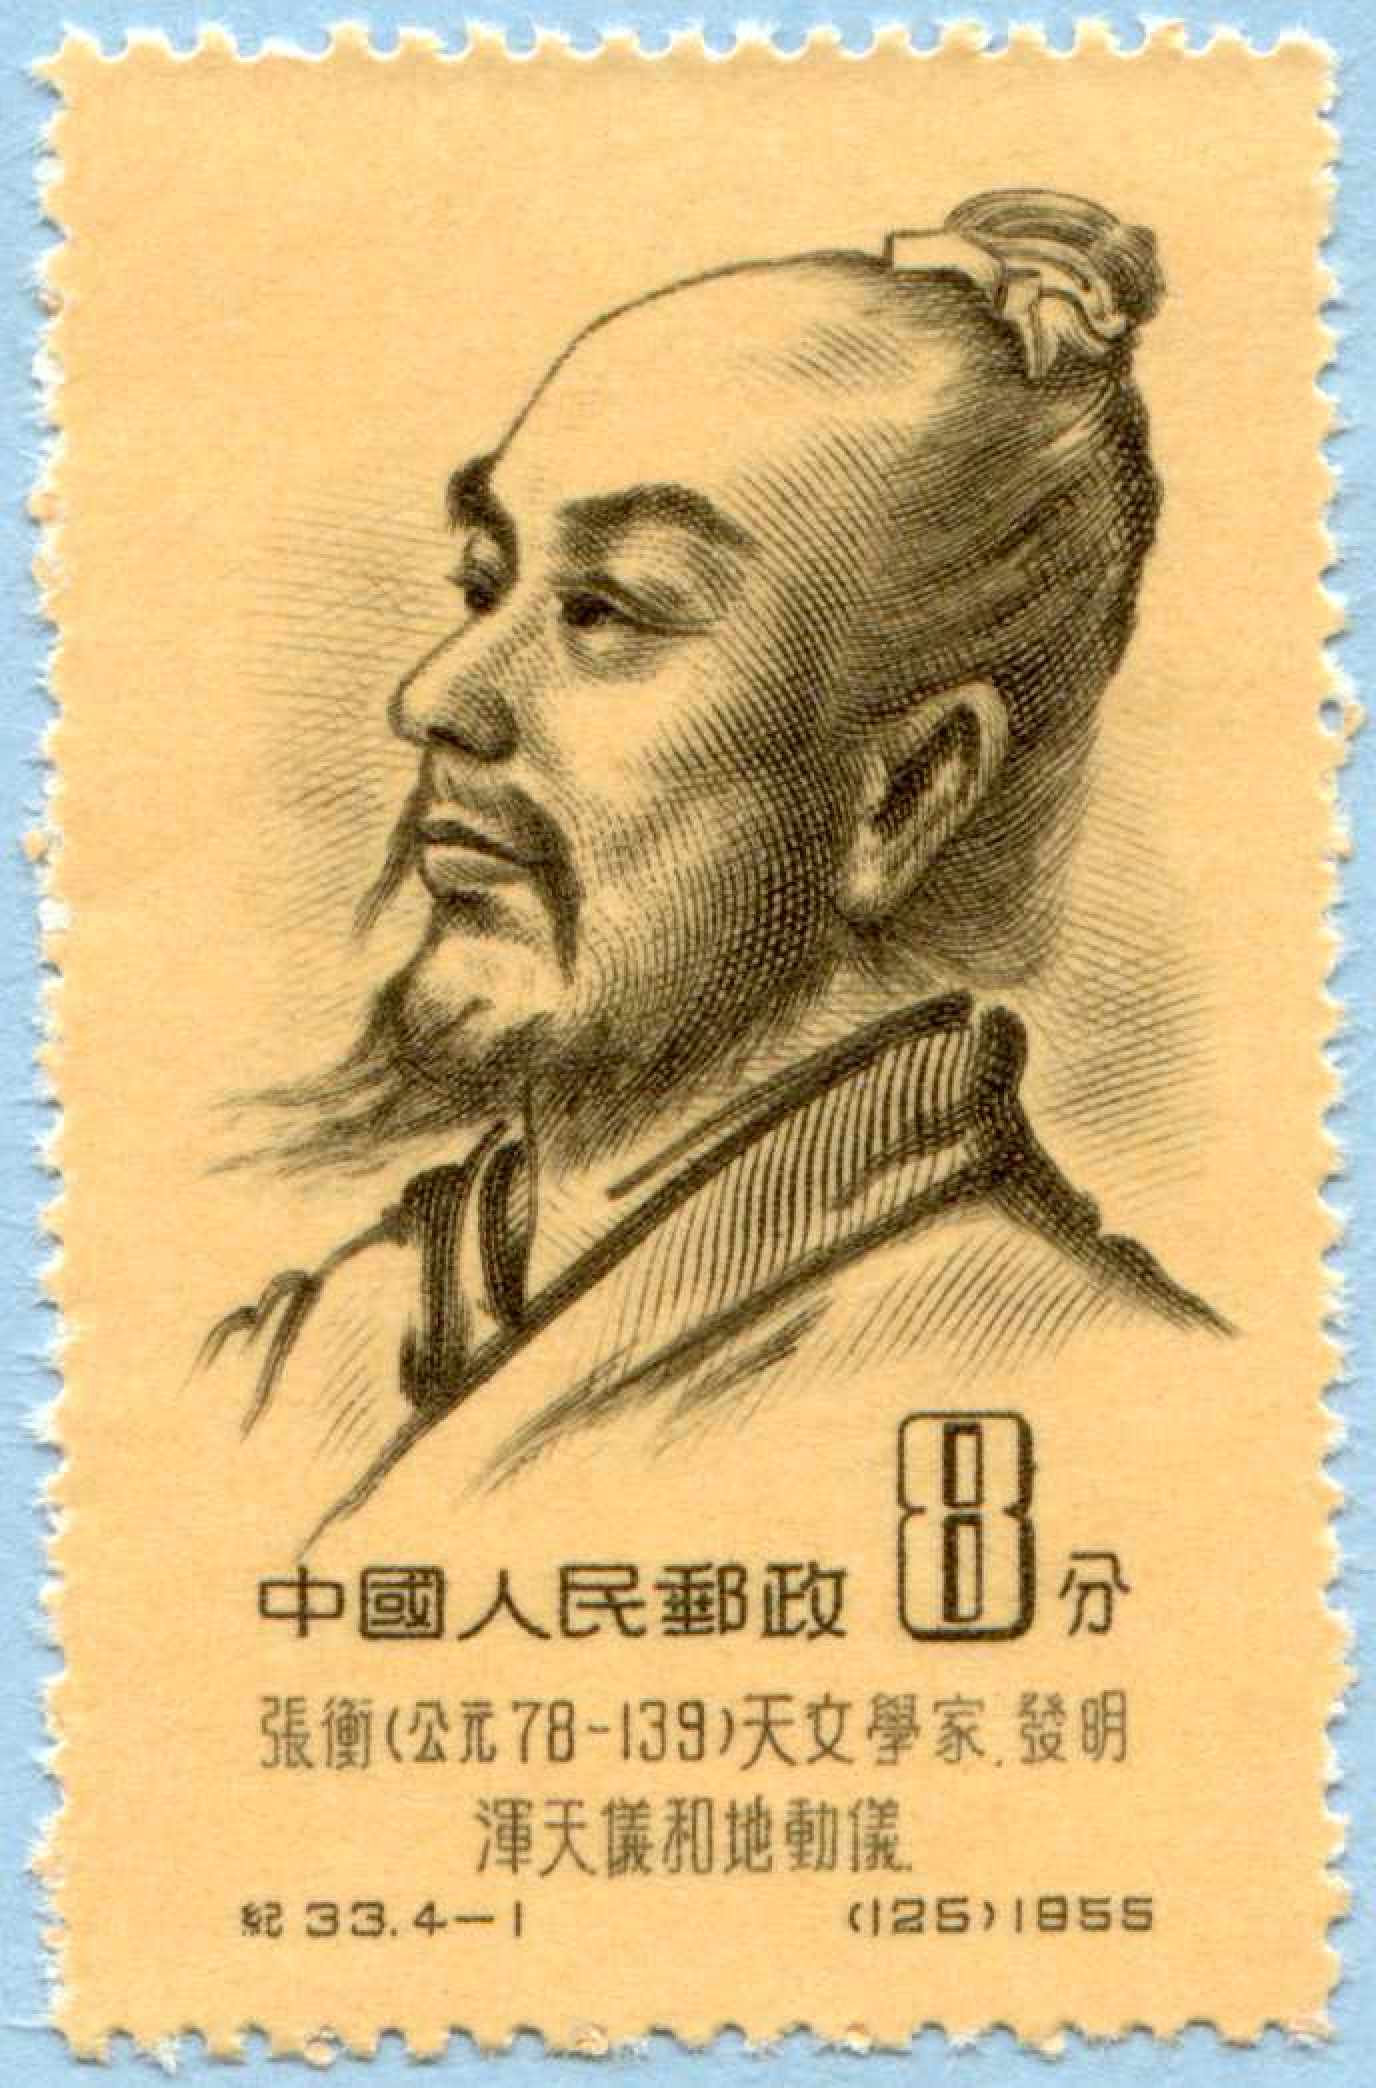 The Han dynasty Chinese scientist and statesman Zhang Heng on a postage stamp issued in China in 1955.